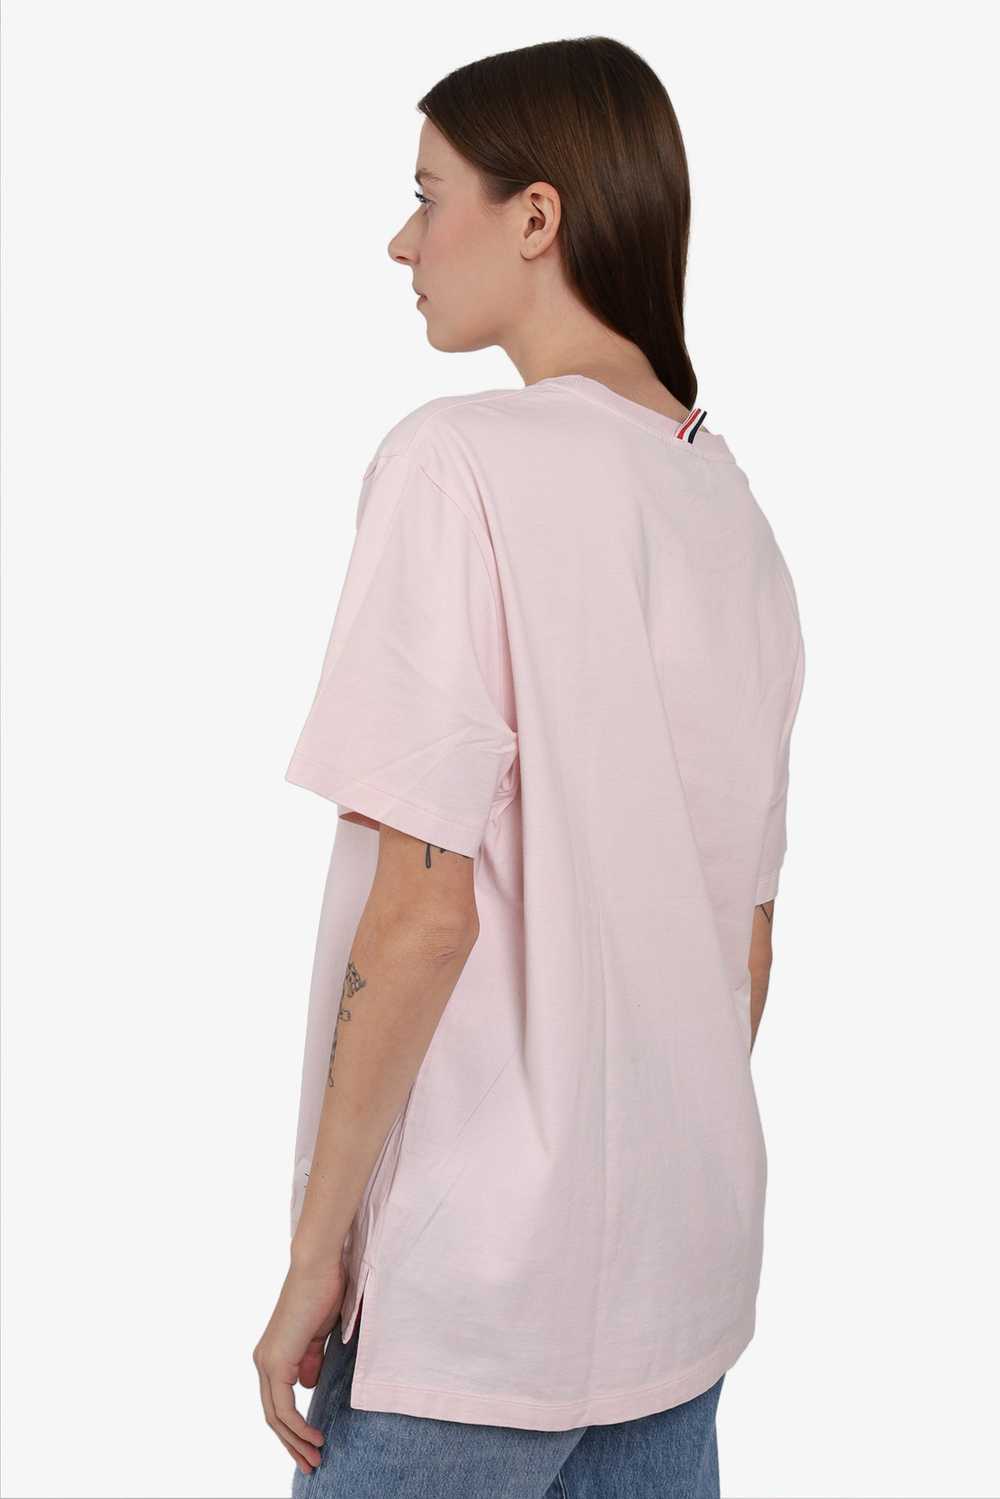 Thom Browne Pink Cotton Scoop Neck T-Shirt Size 4 - image 3